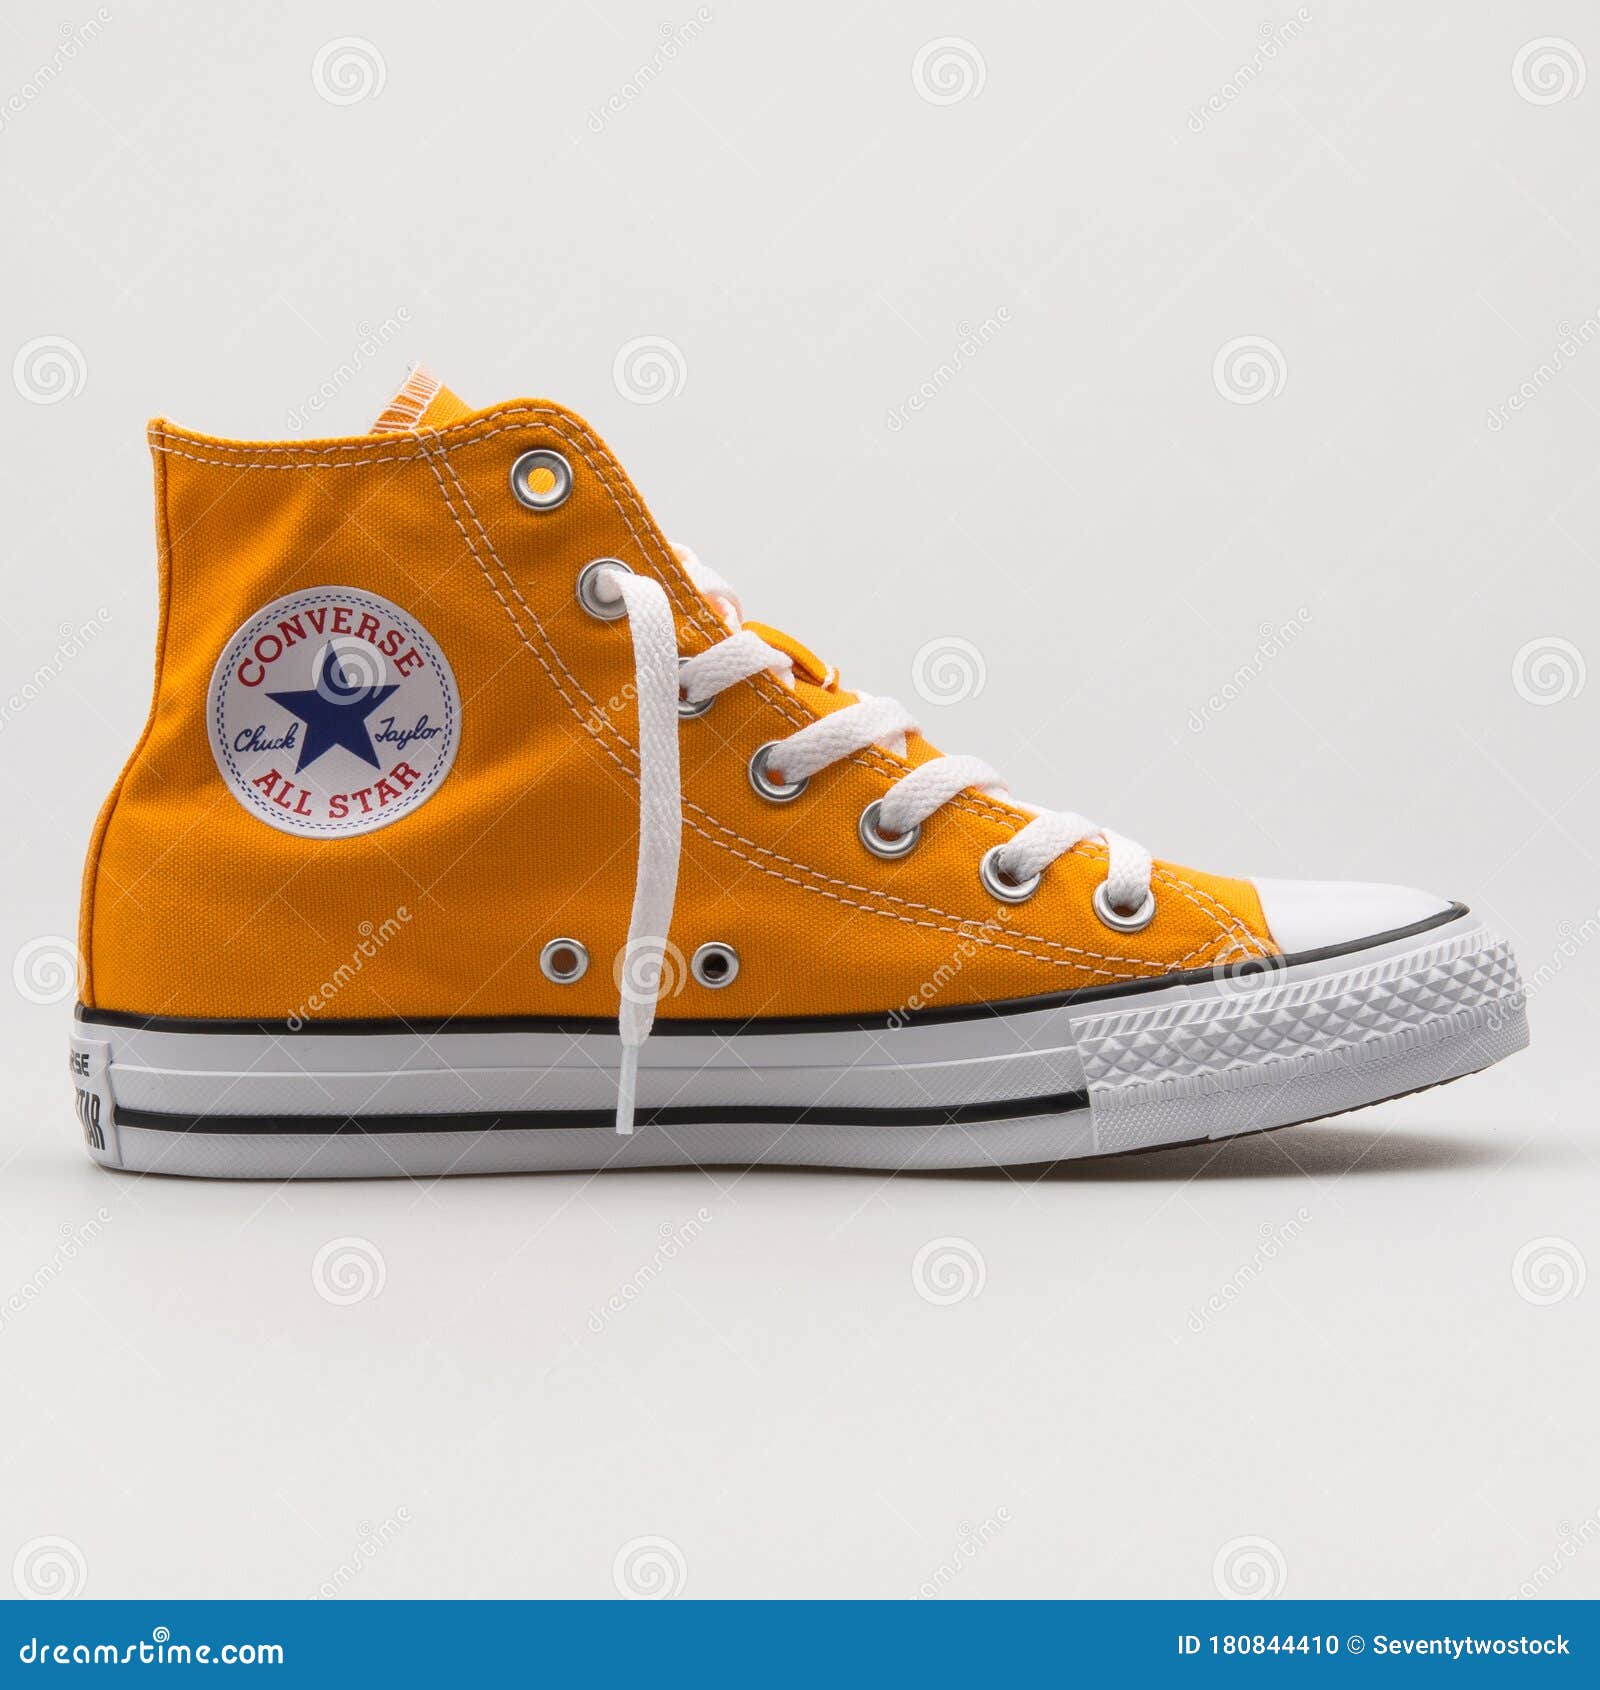 Converse Chuck Taylor All Star High Orange and White Sneaker Editorial  Image - Image of kicks, sneakers: 180844410